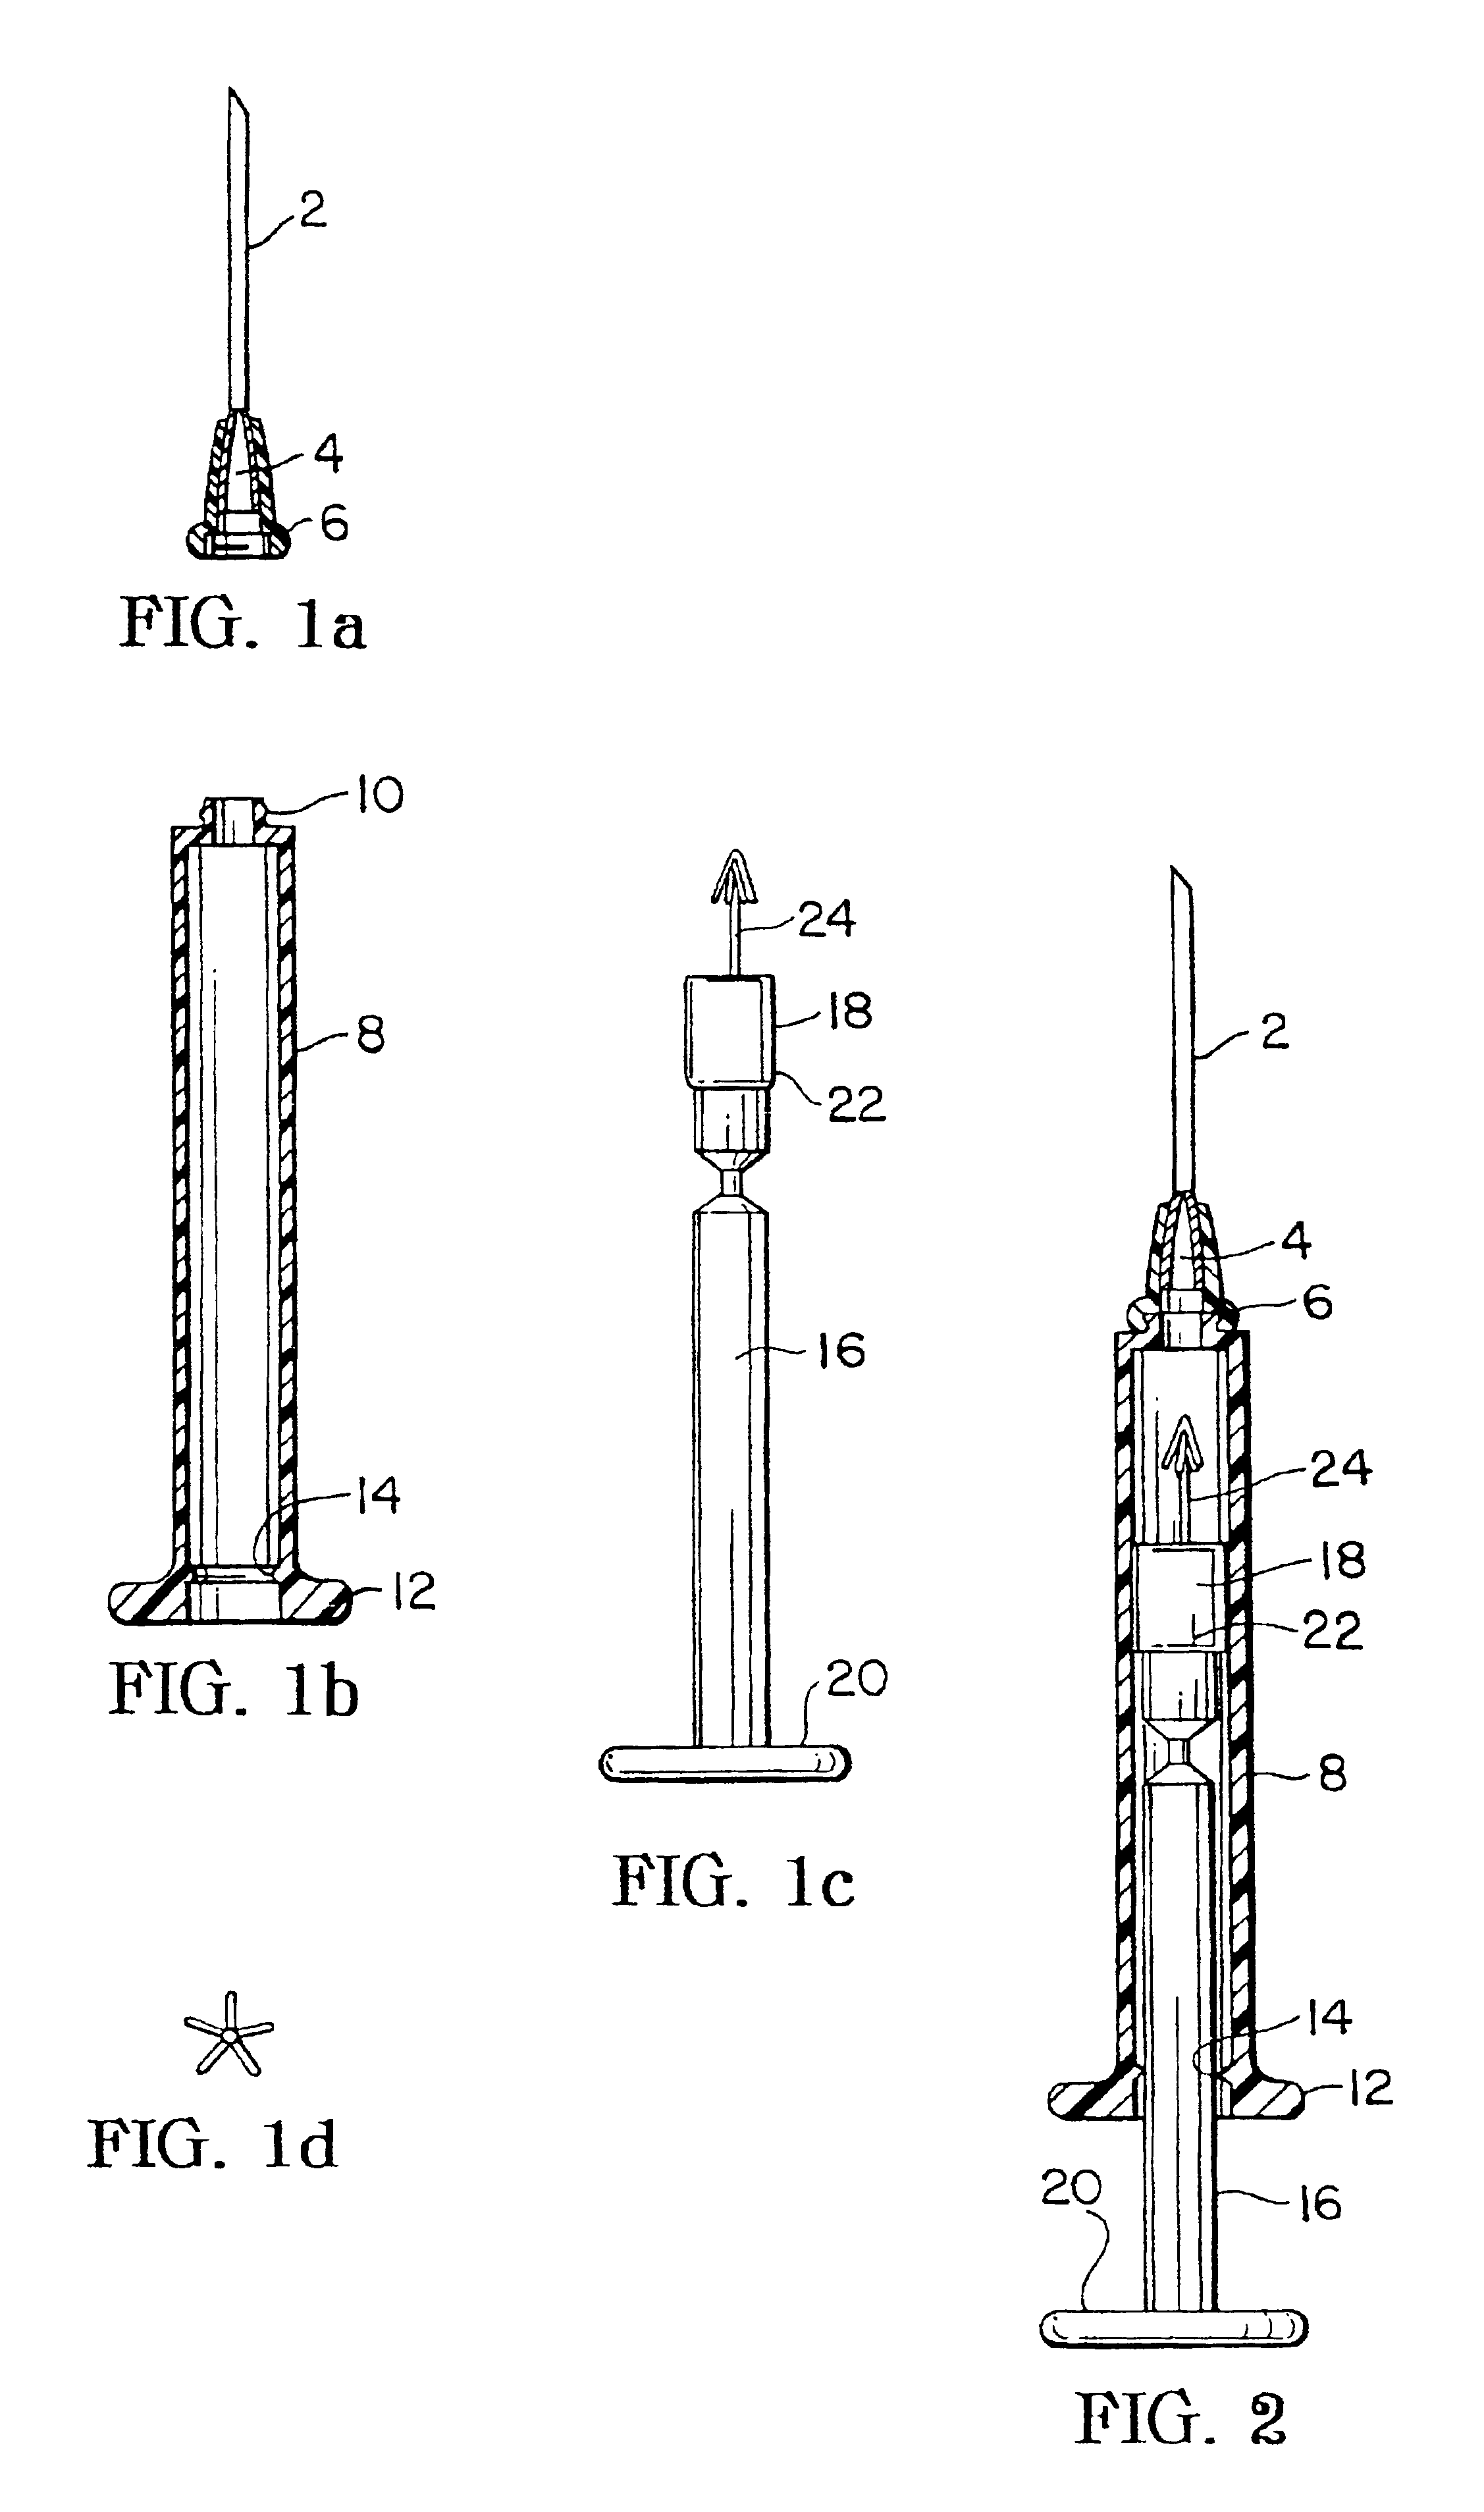 Safety syringe needle device with interchangeable and retractable needle platform